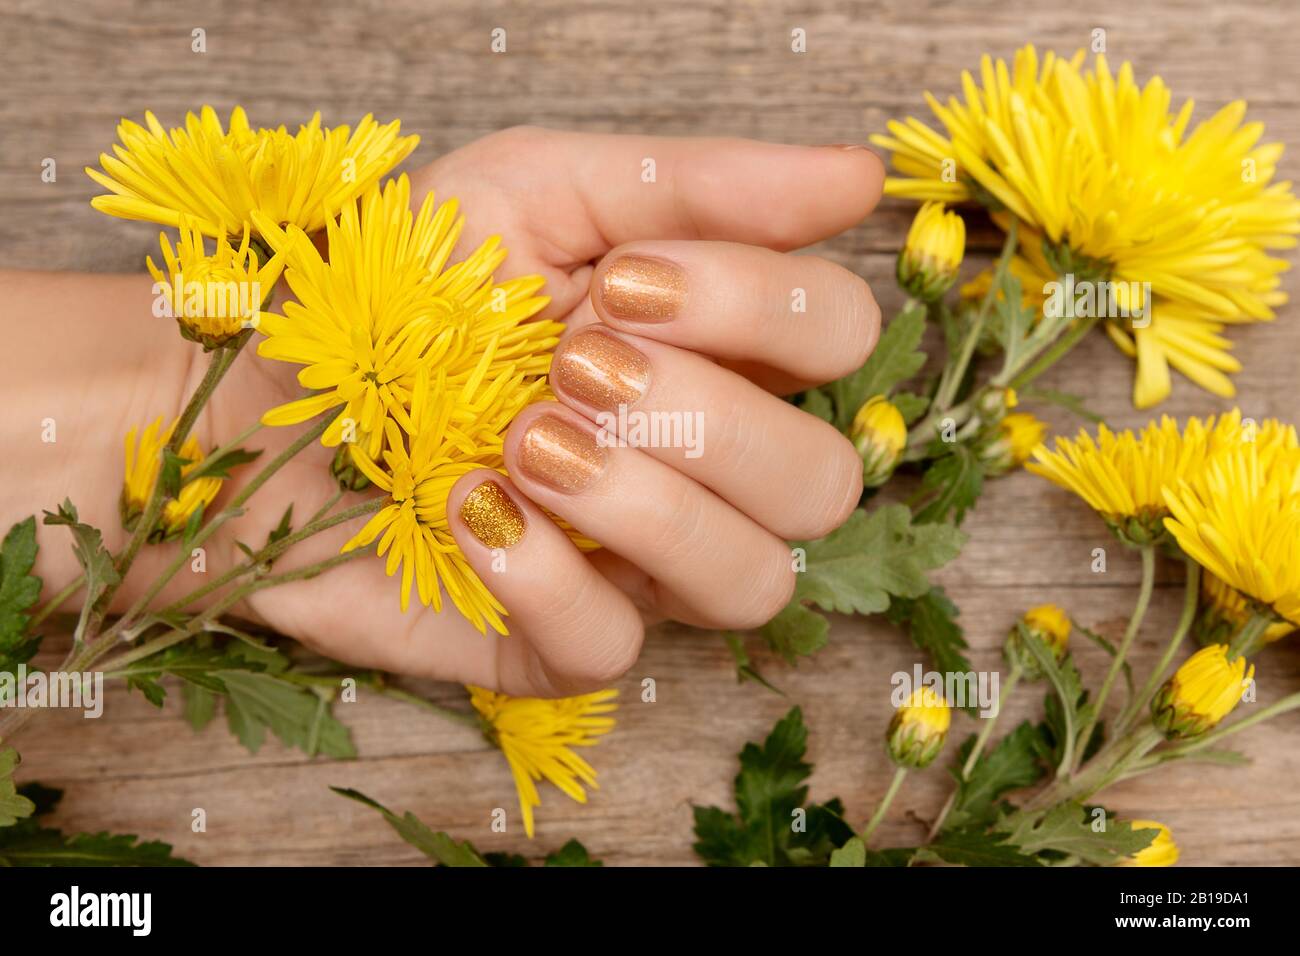 Female hand with glitter nail design holding flowers. Stock Photo